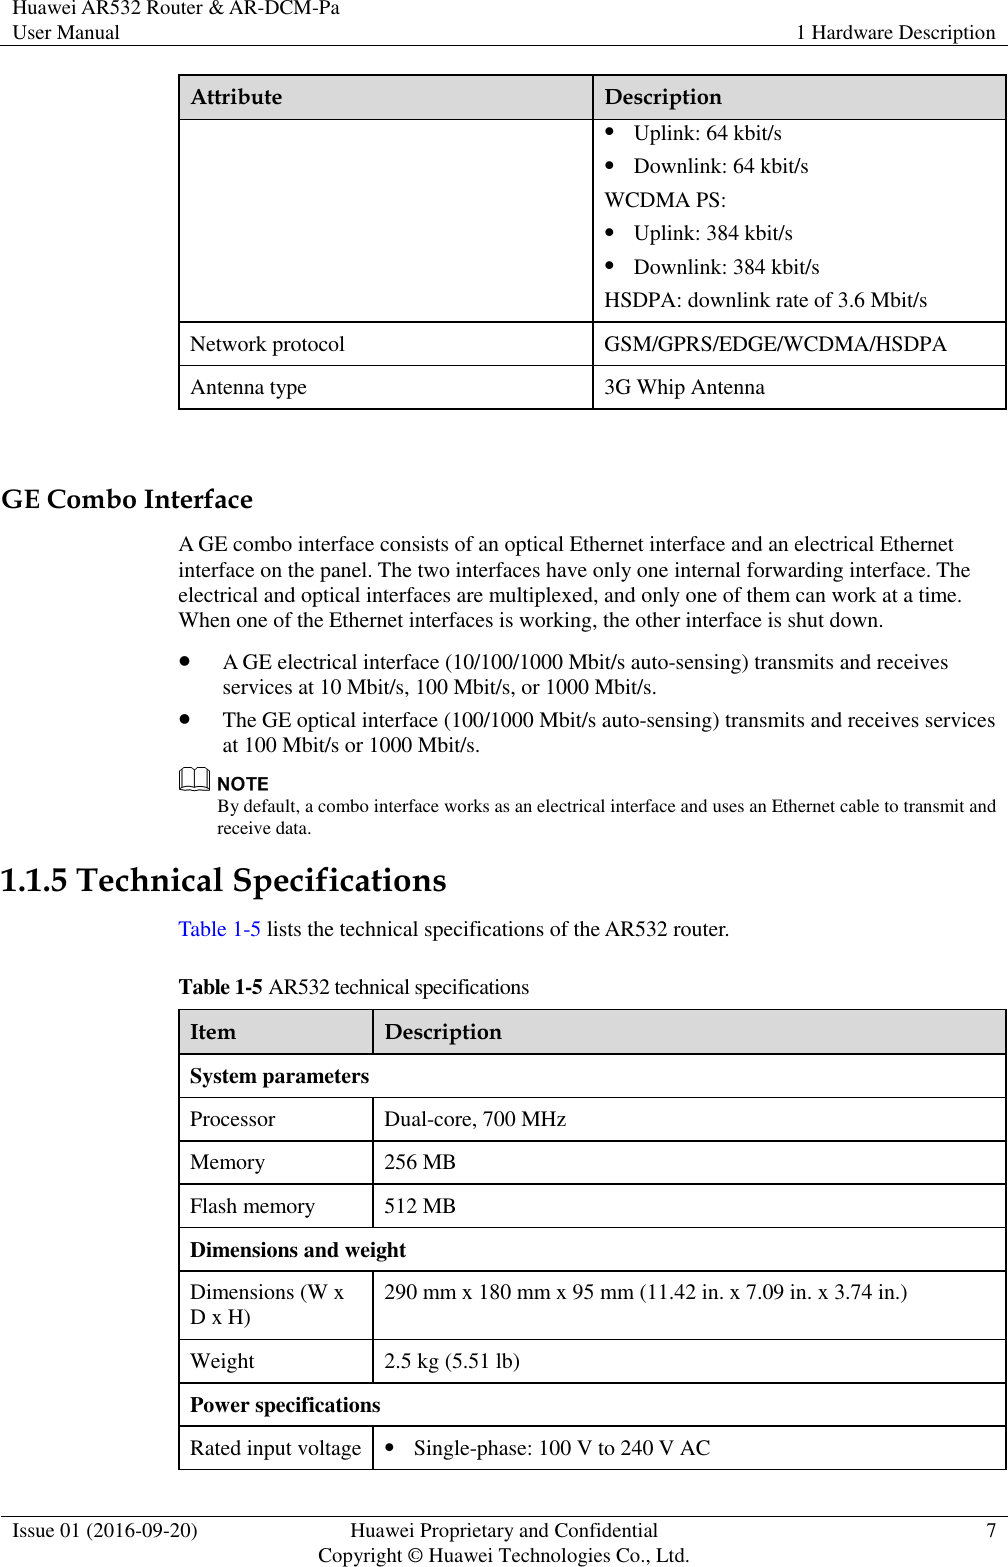 Huawei AR532 Router &amp; AR-DCM-Pa User Manual 1 Hardware Description  Issue 01 (2016-09-20) Huawei Proprietary and Confidential                                     Copyright © Huawei Technologies Co., Ltd. 7  Attribute Description  Uplink: 64 kbit/s  Downlink: 64 kbit/s WCDMA PS:  Uplink: 384 kbit/s  Downlink: 384 kbit/s HSDPA: downlink rate of 3.6 Mbit/s Network protocol GSM/GPRS/EDGE/WCDMA/HSDPA Antenna type 3G Whip Antenna  GE Combo Interface A GE combo interface consists of an optical Ethernet interface and an electrical Ethernet interface on the panel. The two interfaces have only one internal forwarding interface. The electrical and optical interfaces are multiplexed, and only one of them can work at a time. When one of the Ethernet interfaces is working, the other interface is shut down.  A GE electrical interface (10/100/1000 Mbit/s auto-sensing) transmits and receives services at 10 Mbit/s, 100 Mbit/s, or 1000 Mbit/s.  The GE optical interface (100/1000 Mbit/s auto-sensing) transmits and receives services at 100 Mbit/s or 1000 Mbit/s.  By default, a combo interface works as an electrical interface and uses an Ethernet cable to transmit and receive data. 1.1.5 Technical Specifications Table 1-5 lists the technical specifications of the AR532 router.   Table 1-5 AR532 technical specifications Item Description System parameters Processor Dual-core, 700 MHz Memory 256 MB Flash memory 512 MB Dimensions and weight Dimensions (W x D x H) 290 mm x 180 mm x 95 mm (11.42 in. x 7.09 in. x 3.74 in.) Weight 2.5 kg (5.51 lb) Power specifications Rated input voltage  Single-phase: 100 V to 240 V AC 